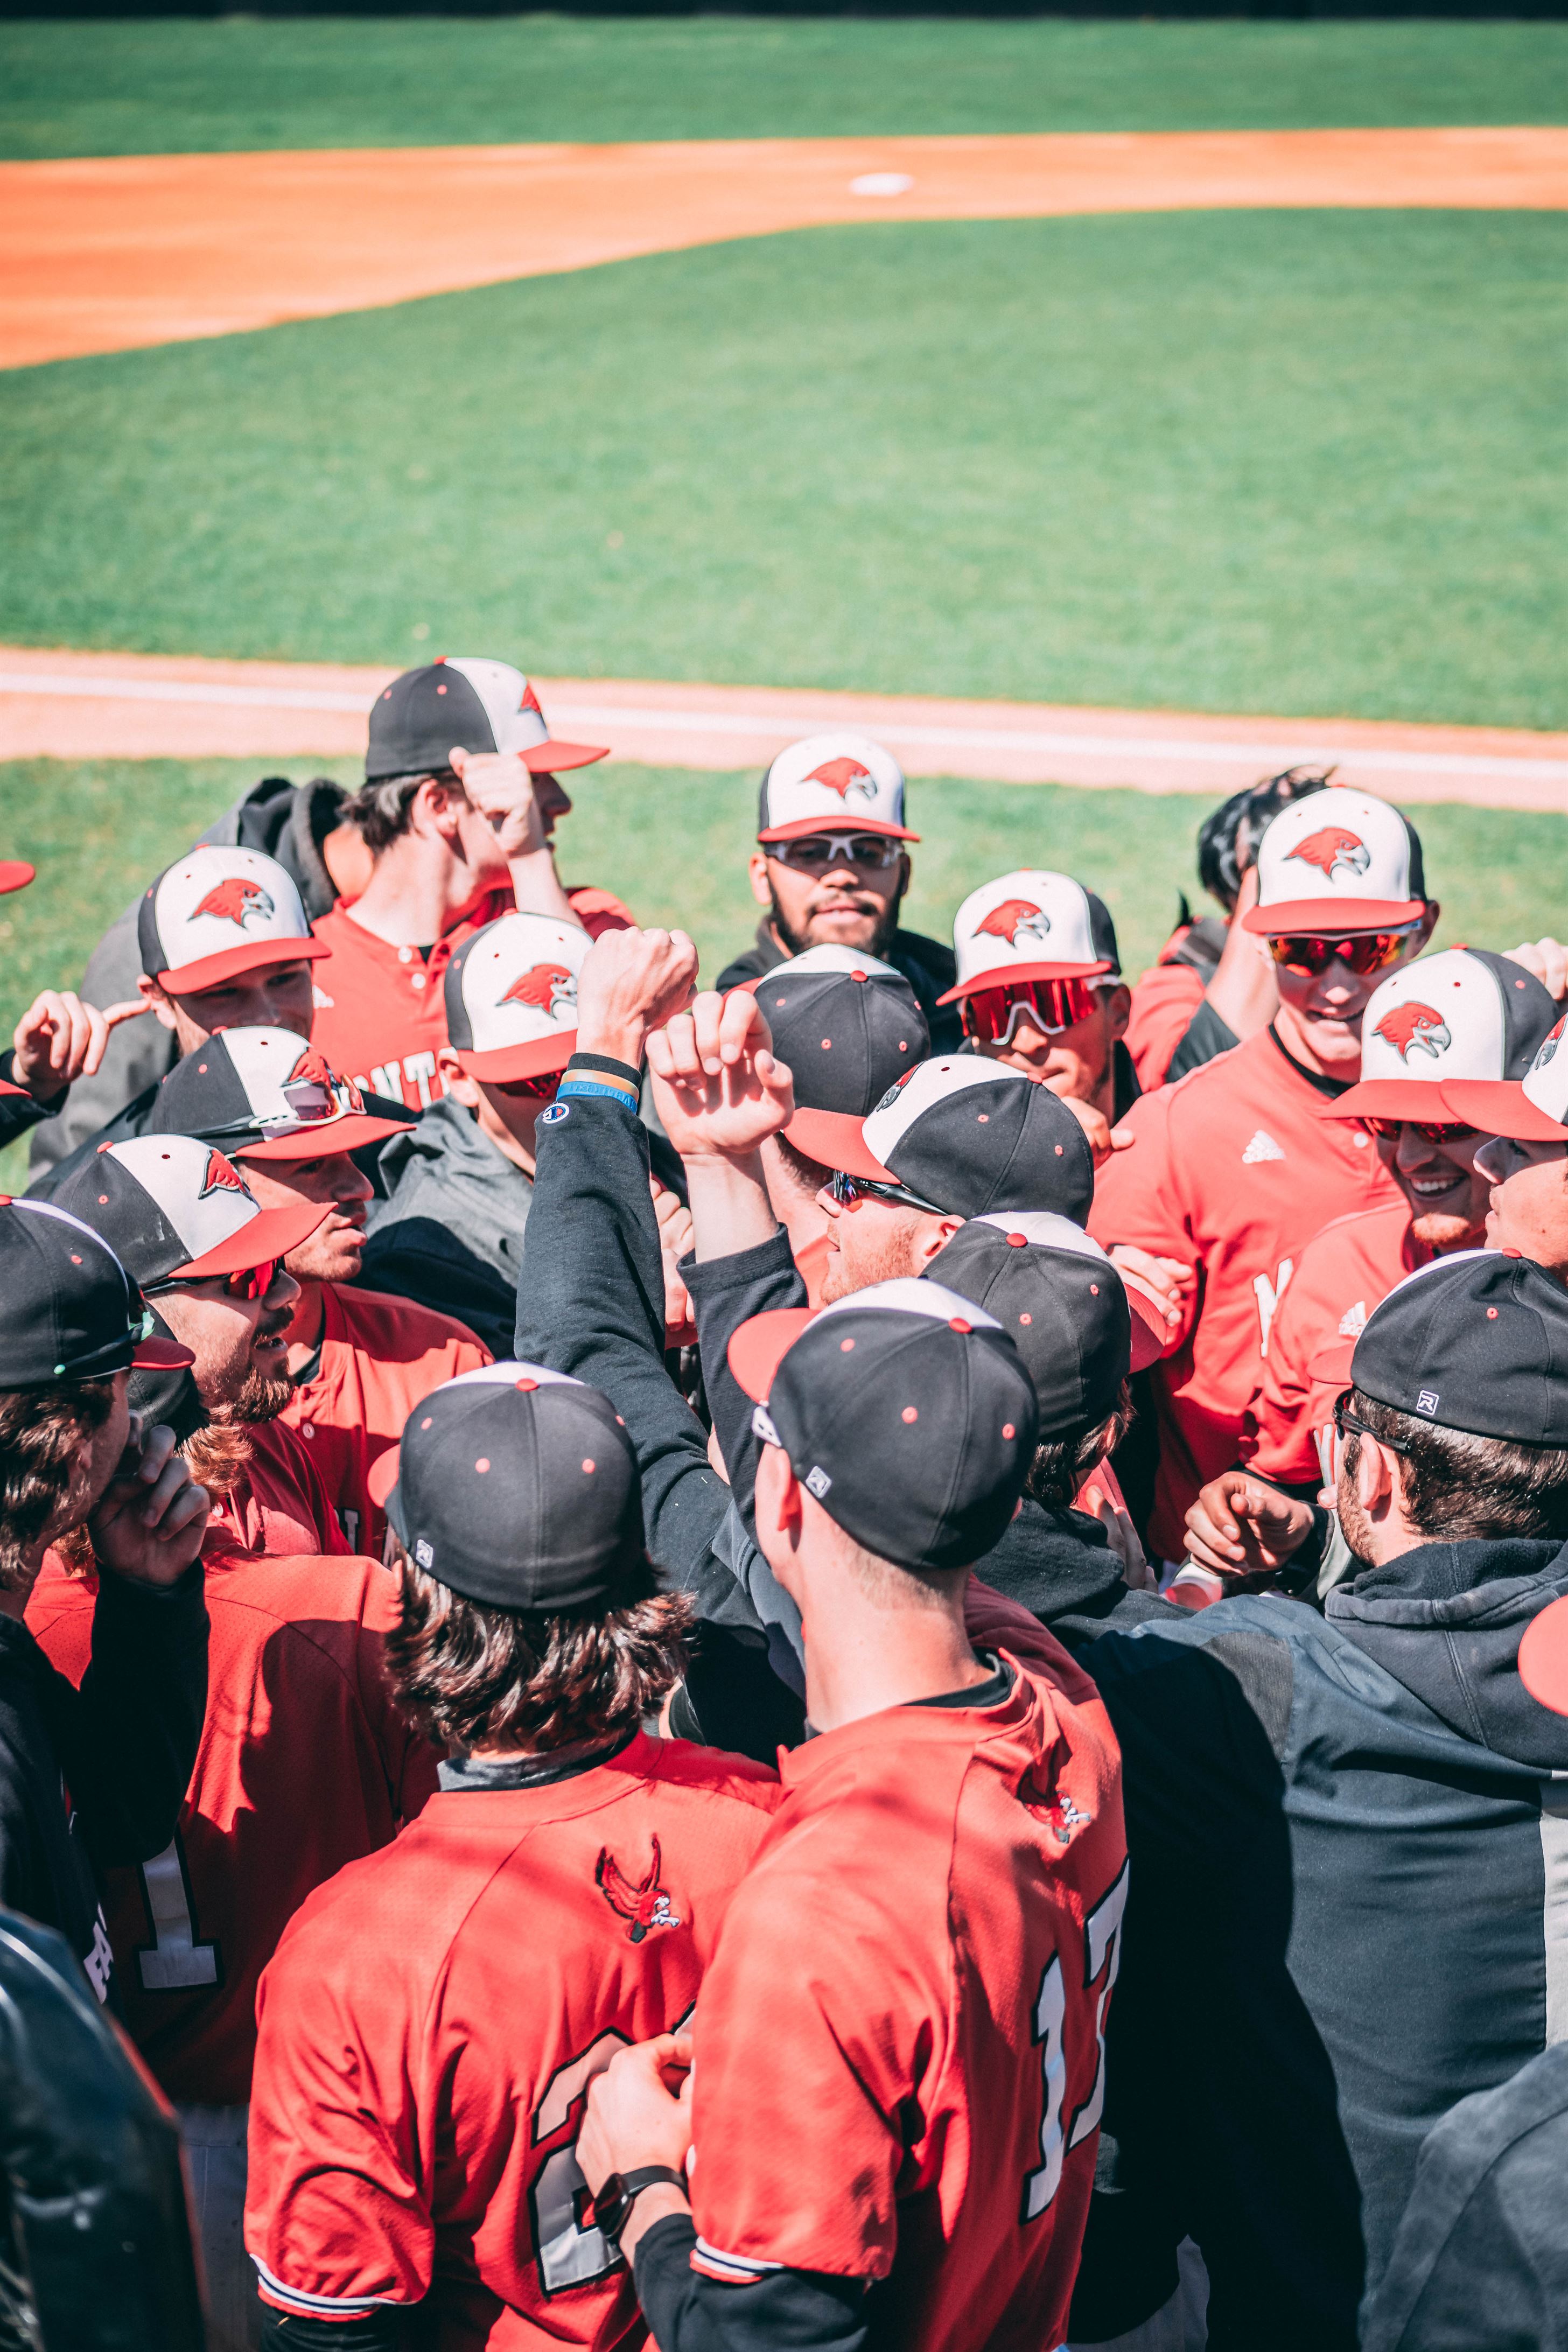 The Red Hawks ended the season with 31 wins, a mark they have not reached since 2006. Dan Dreisbach | The Montclarion